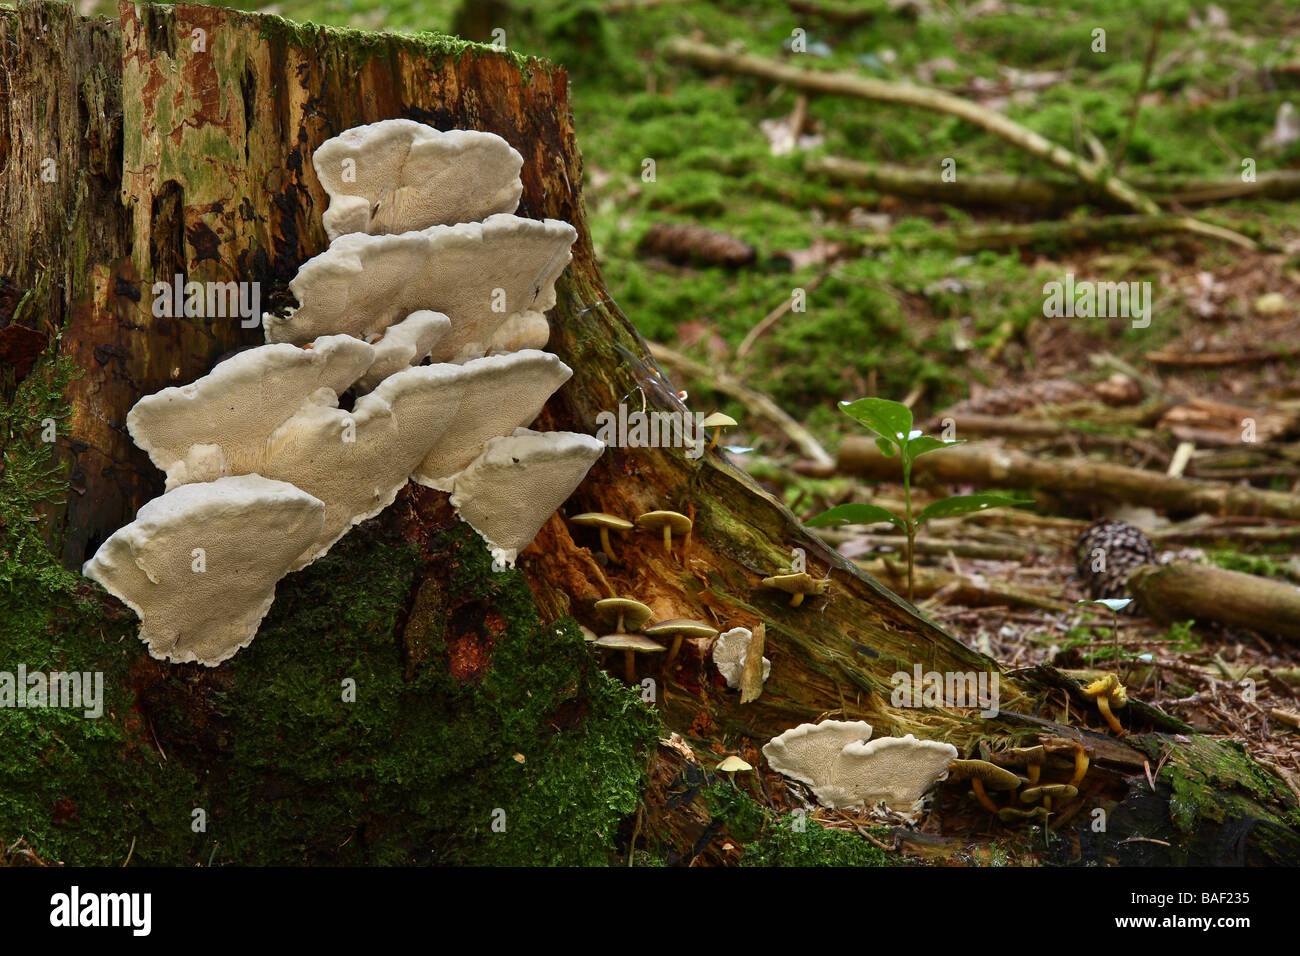 A group of Tyromyces stipticus bracket fungi growing on an old tree stump Limousin France Stock Photo